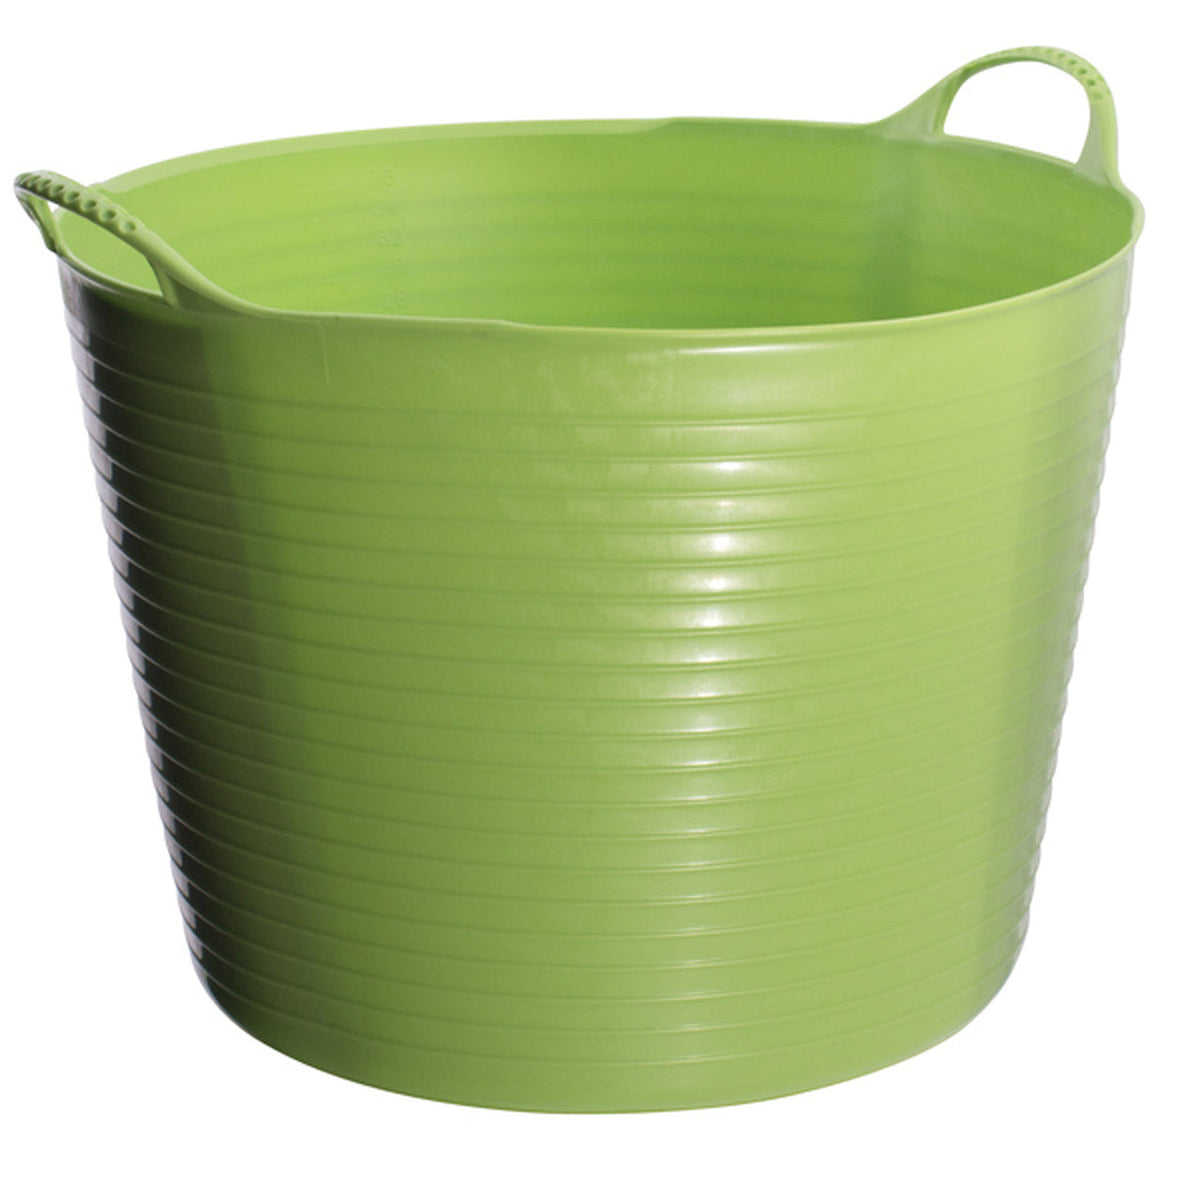 Large green bucket with measurements on inside and two curved handles.